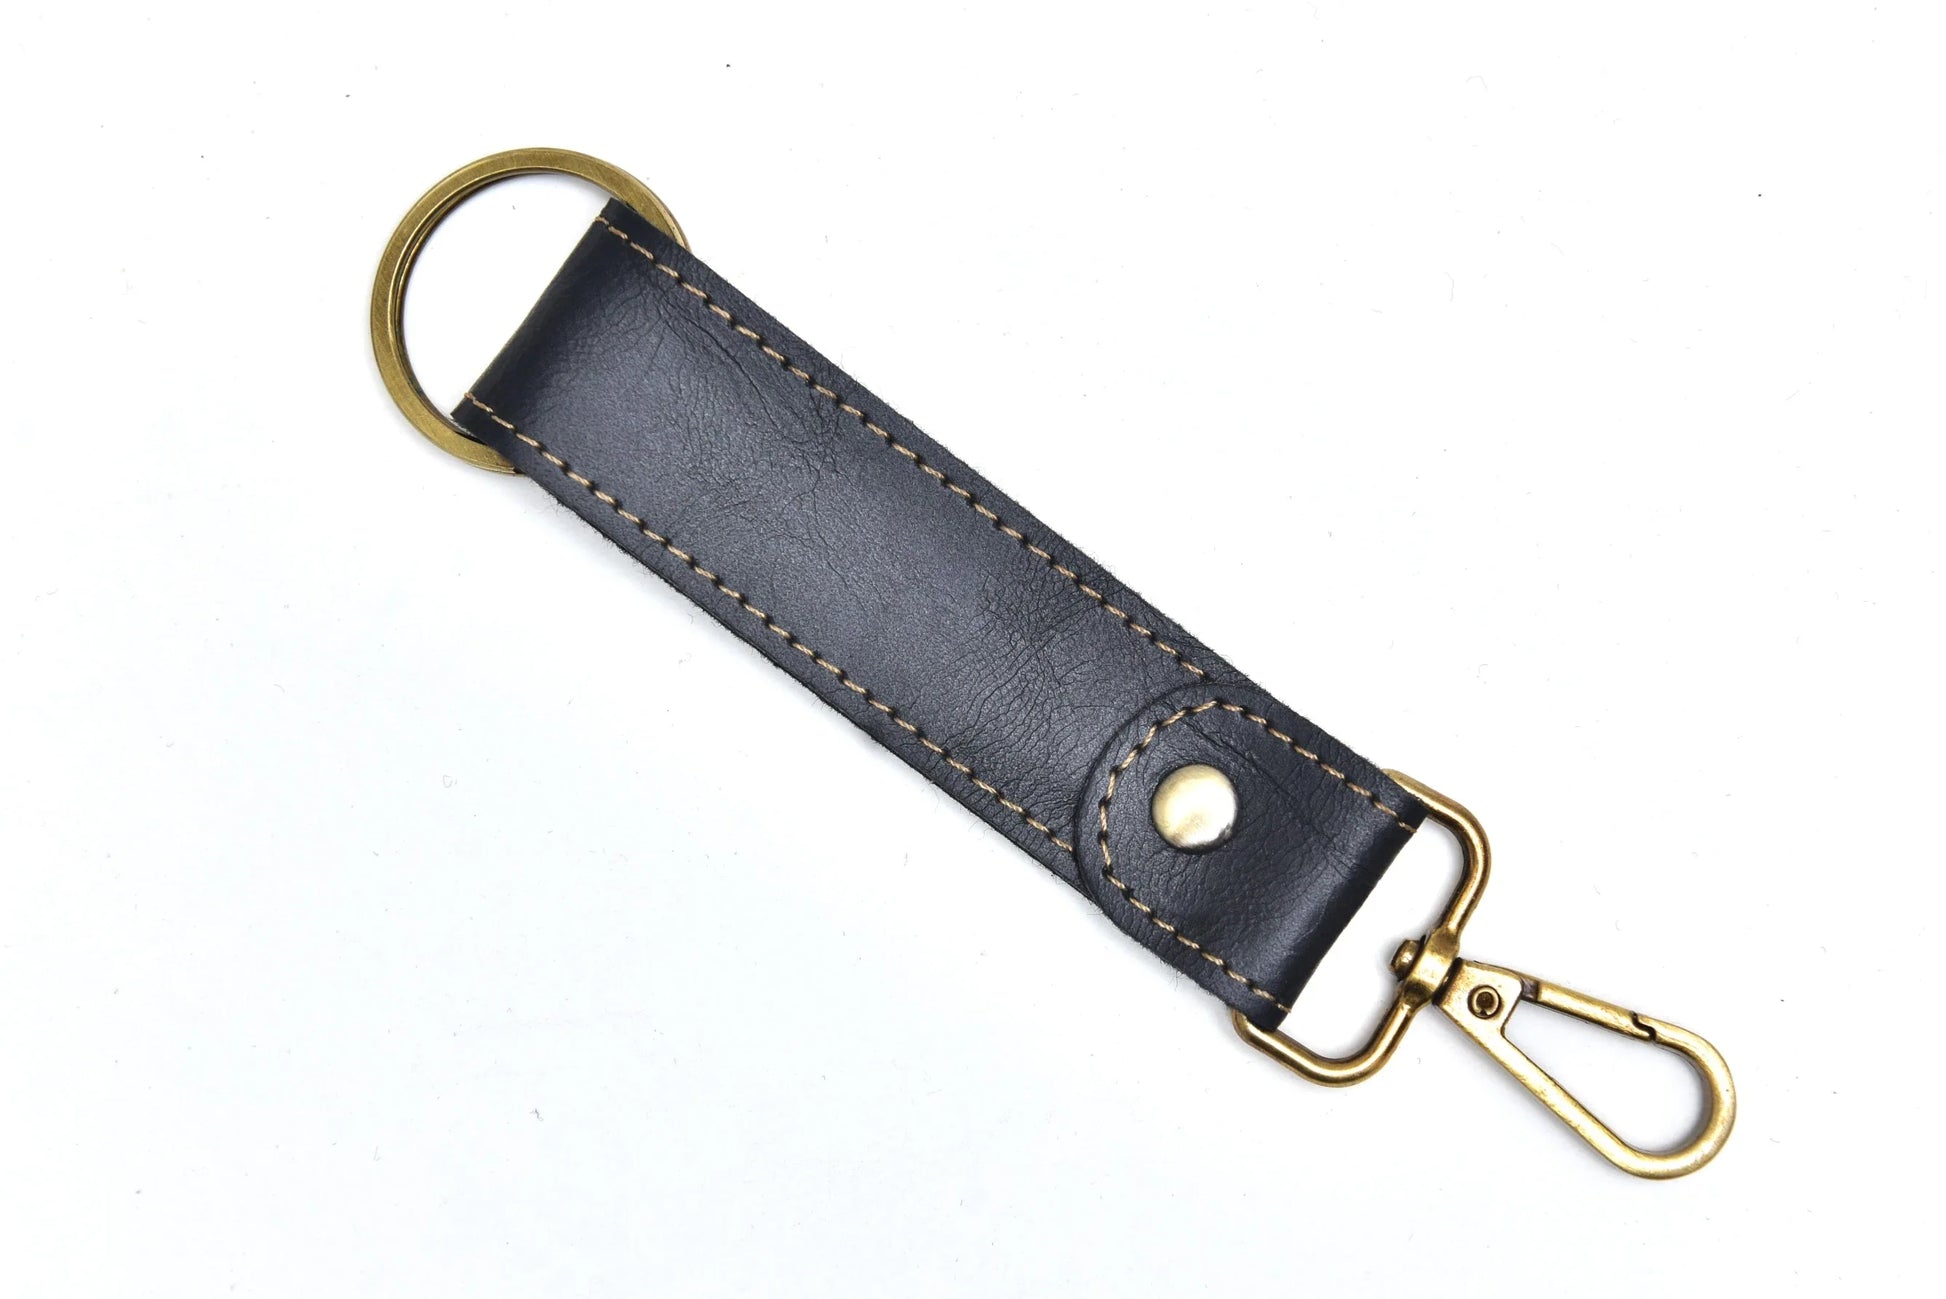 "A custom leather keychain made with premium materials for a long-lasting and durable accessory. "